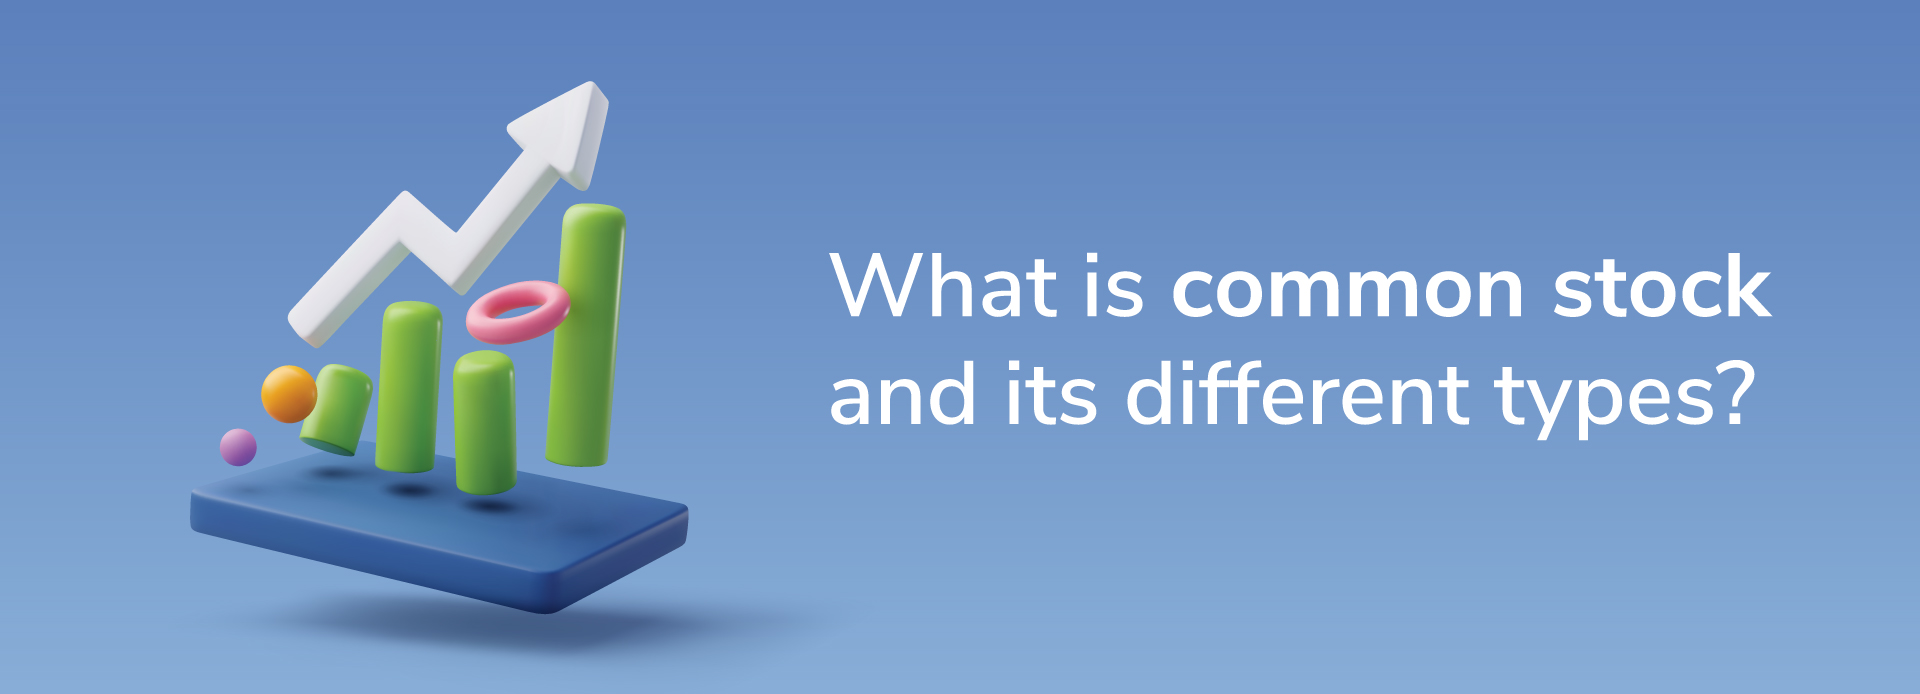 What is common stock and its different types? How does it differ from preferred stock?